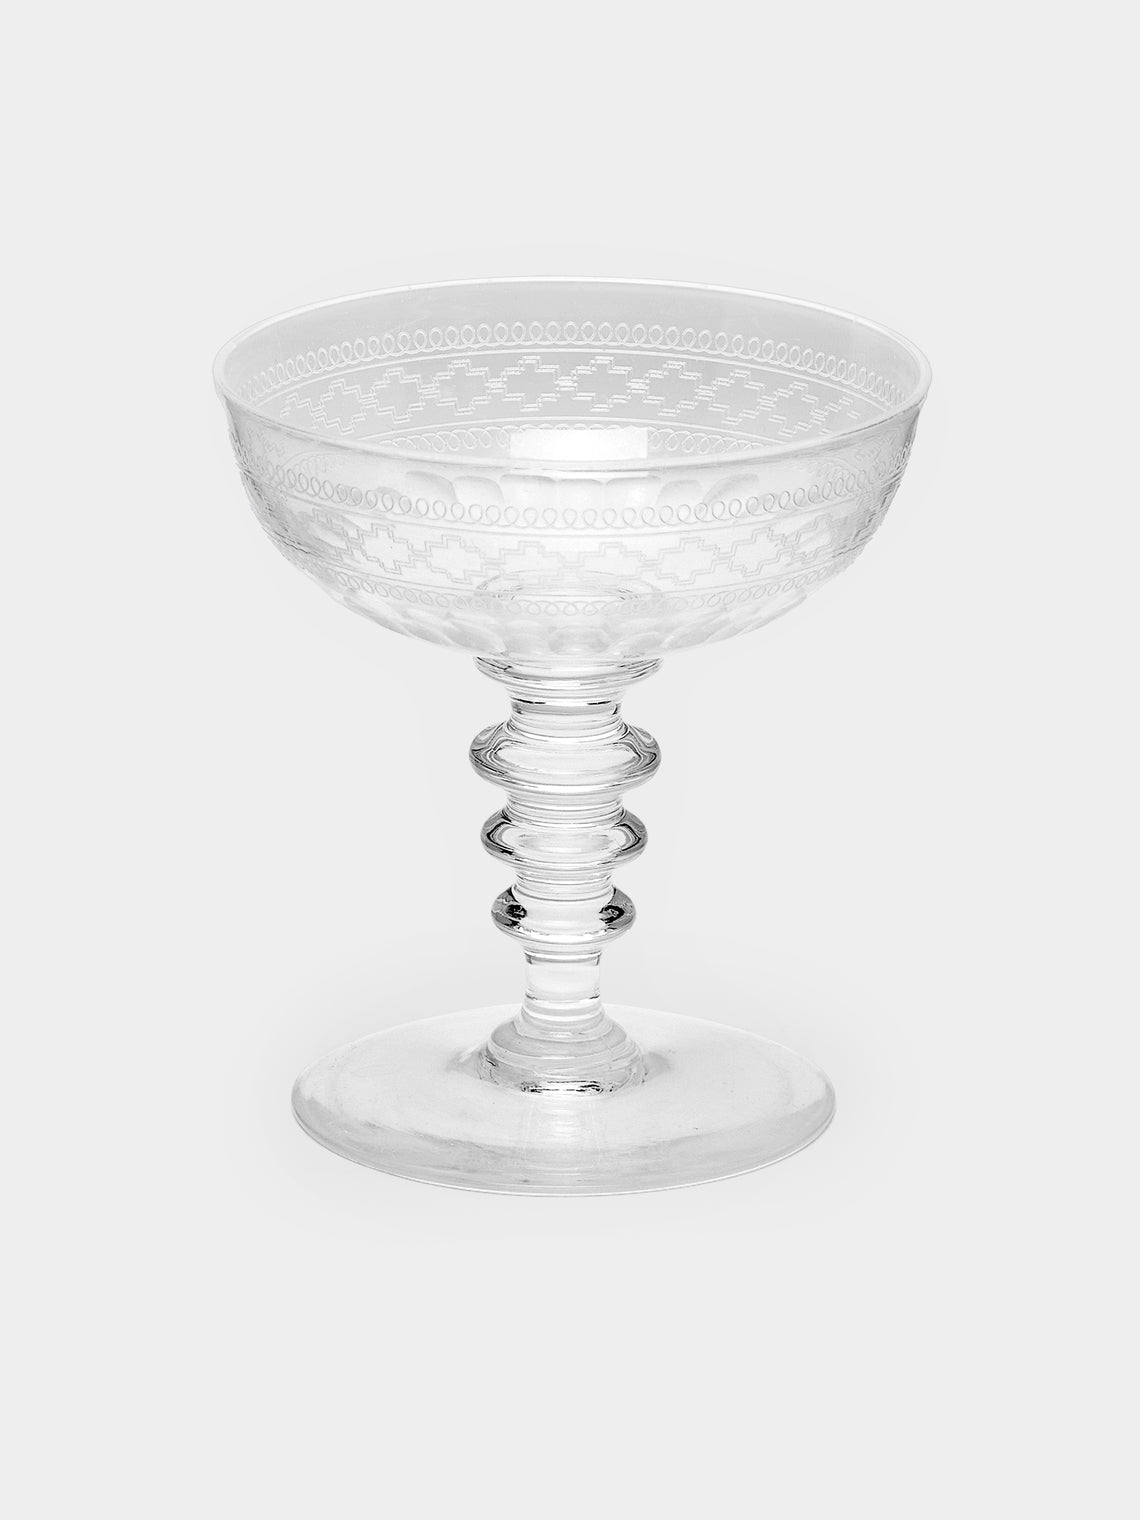 Antique and Vintage - 1860s Crystal Champagne Coupes (Set of 8) -  - ABASK - 